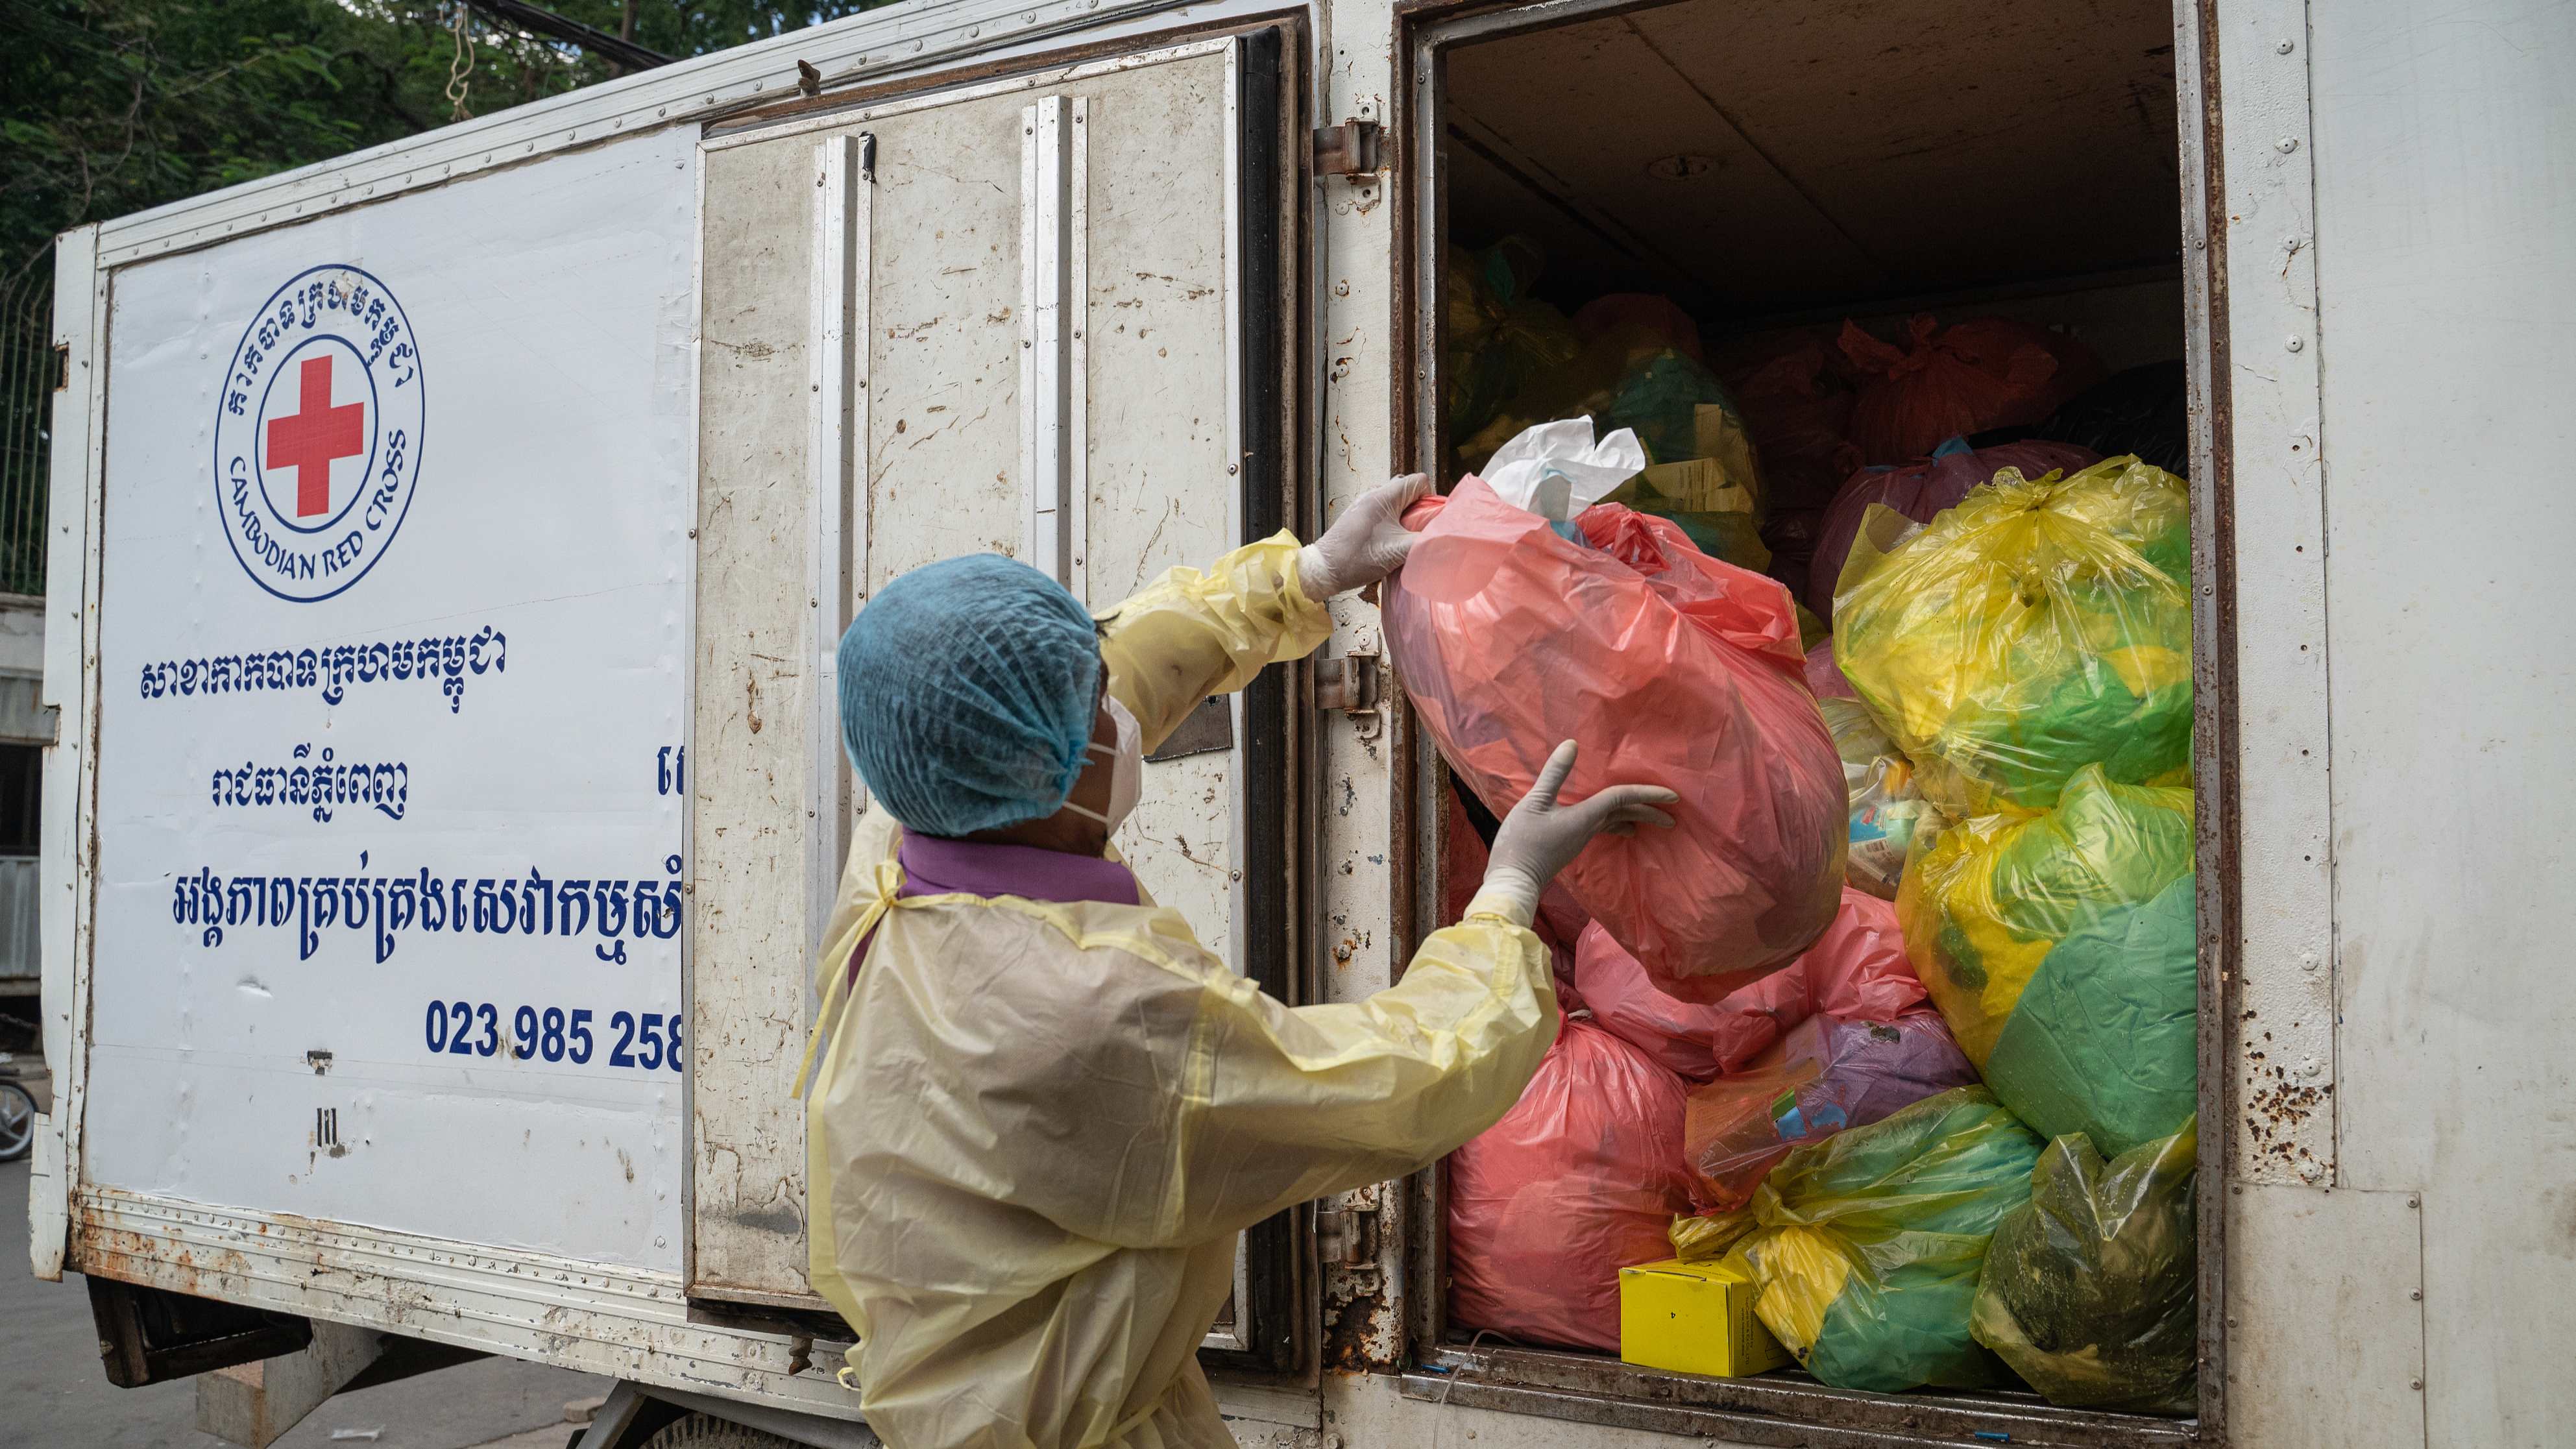 A worker tosses a bag of medical waste onto a medical waste collection van in Phnom Penh, Cambodia, October 22, 2021. /CFP